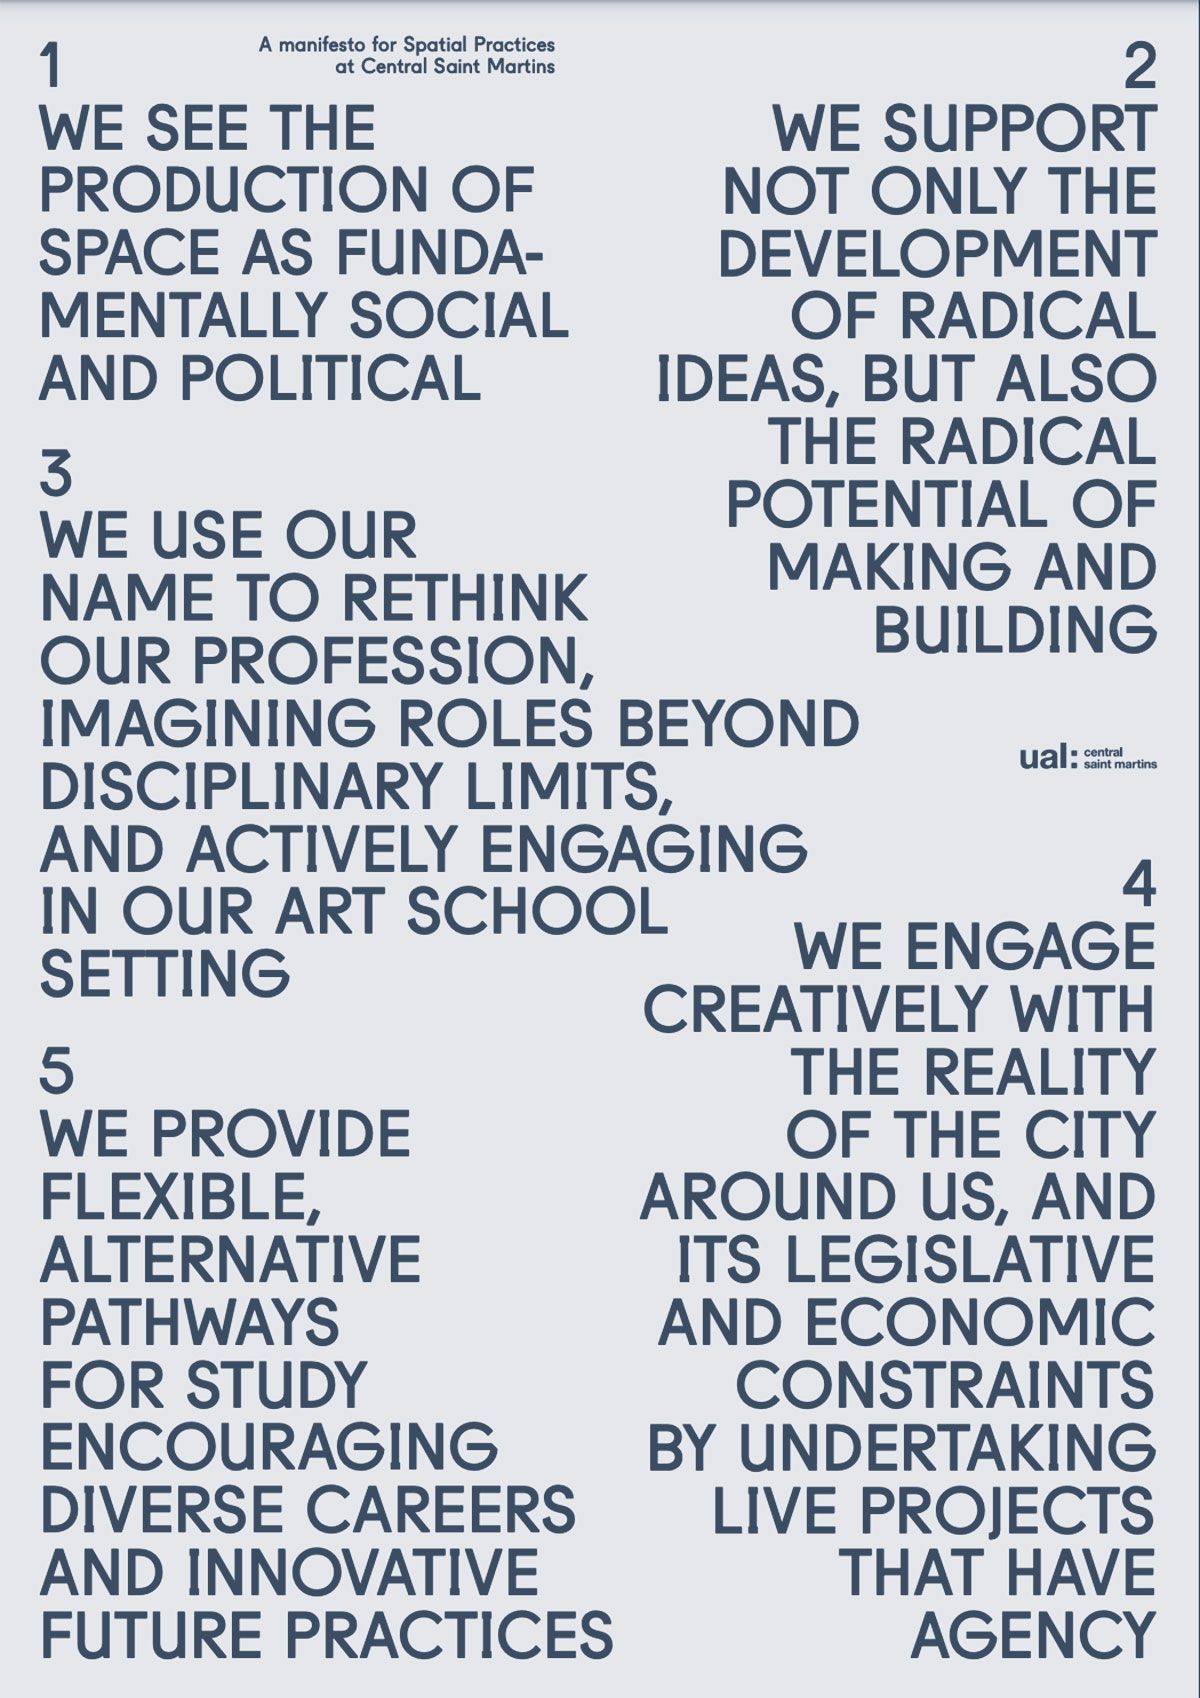 A Manifesto for Spatial Practices at Central Saint Martins